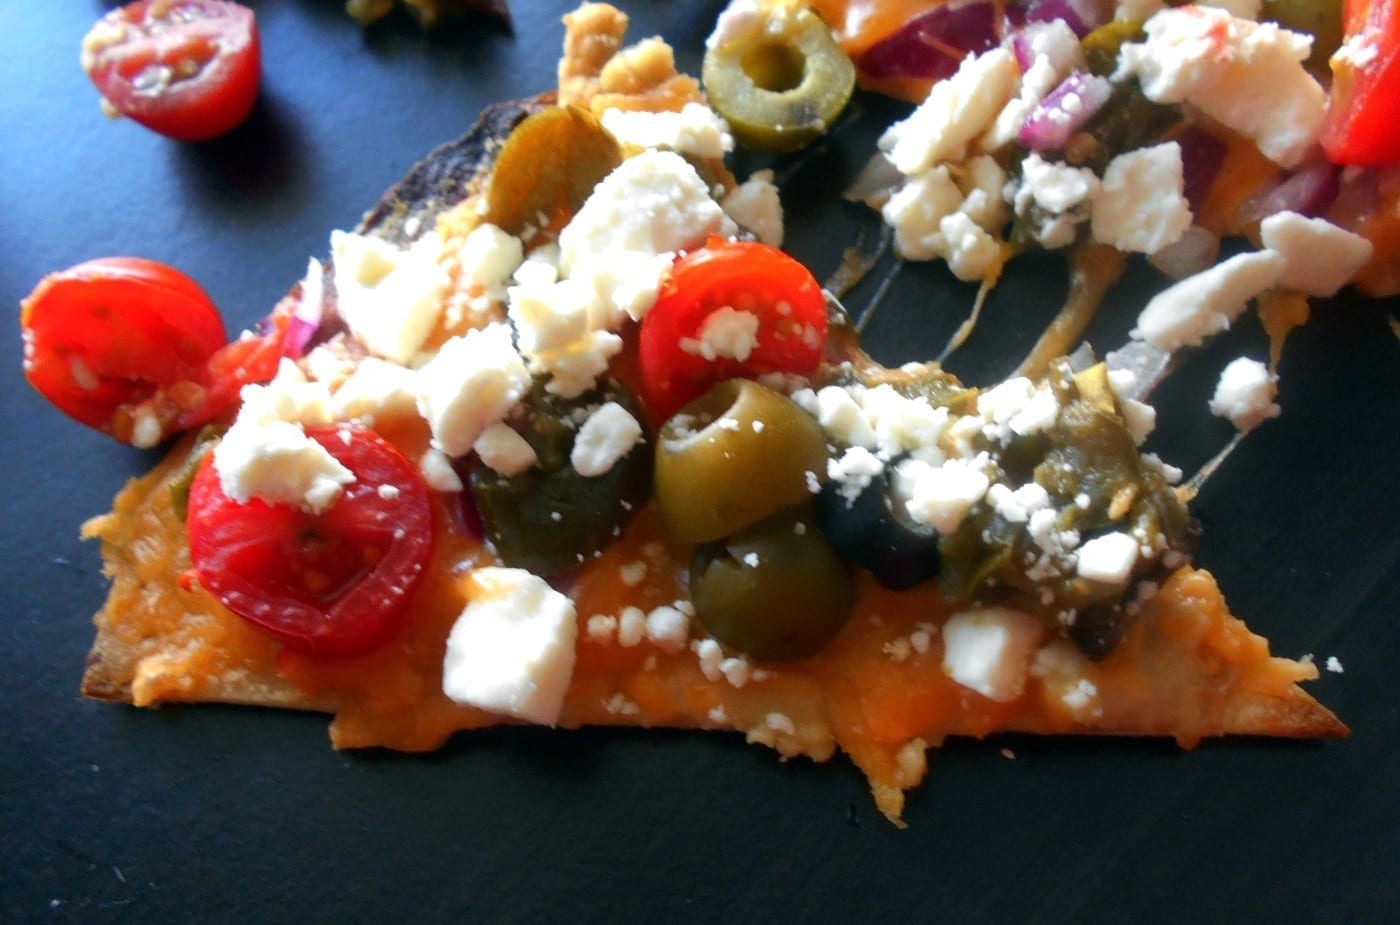 Greek Nachos Recipe made with Hummus, olives, tomatoes, feta and cheddar cheese. Mediterranean Diet Recipe